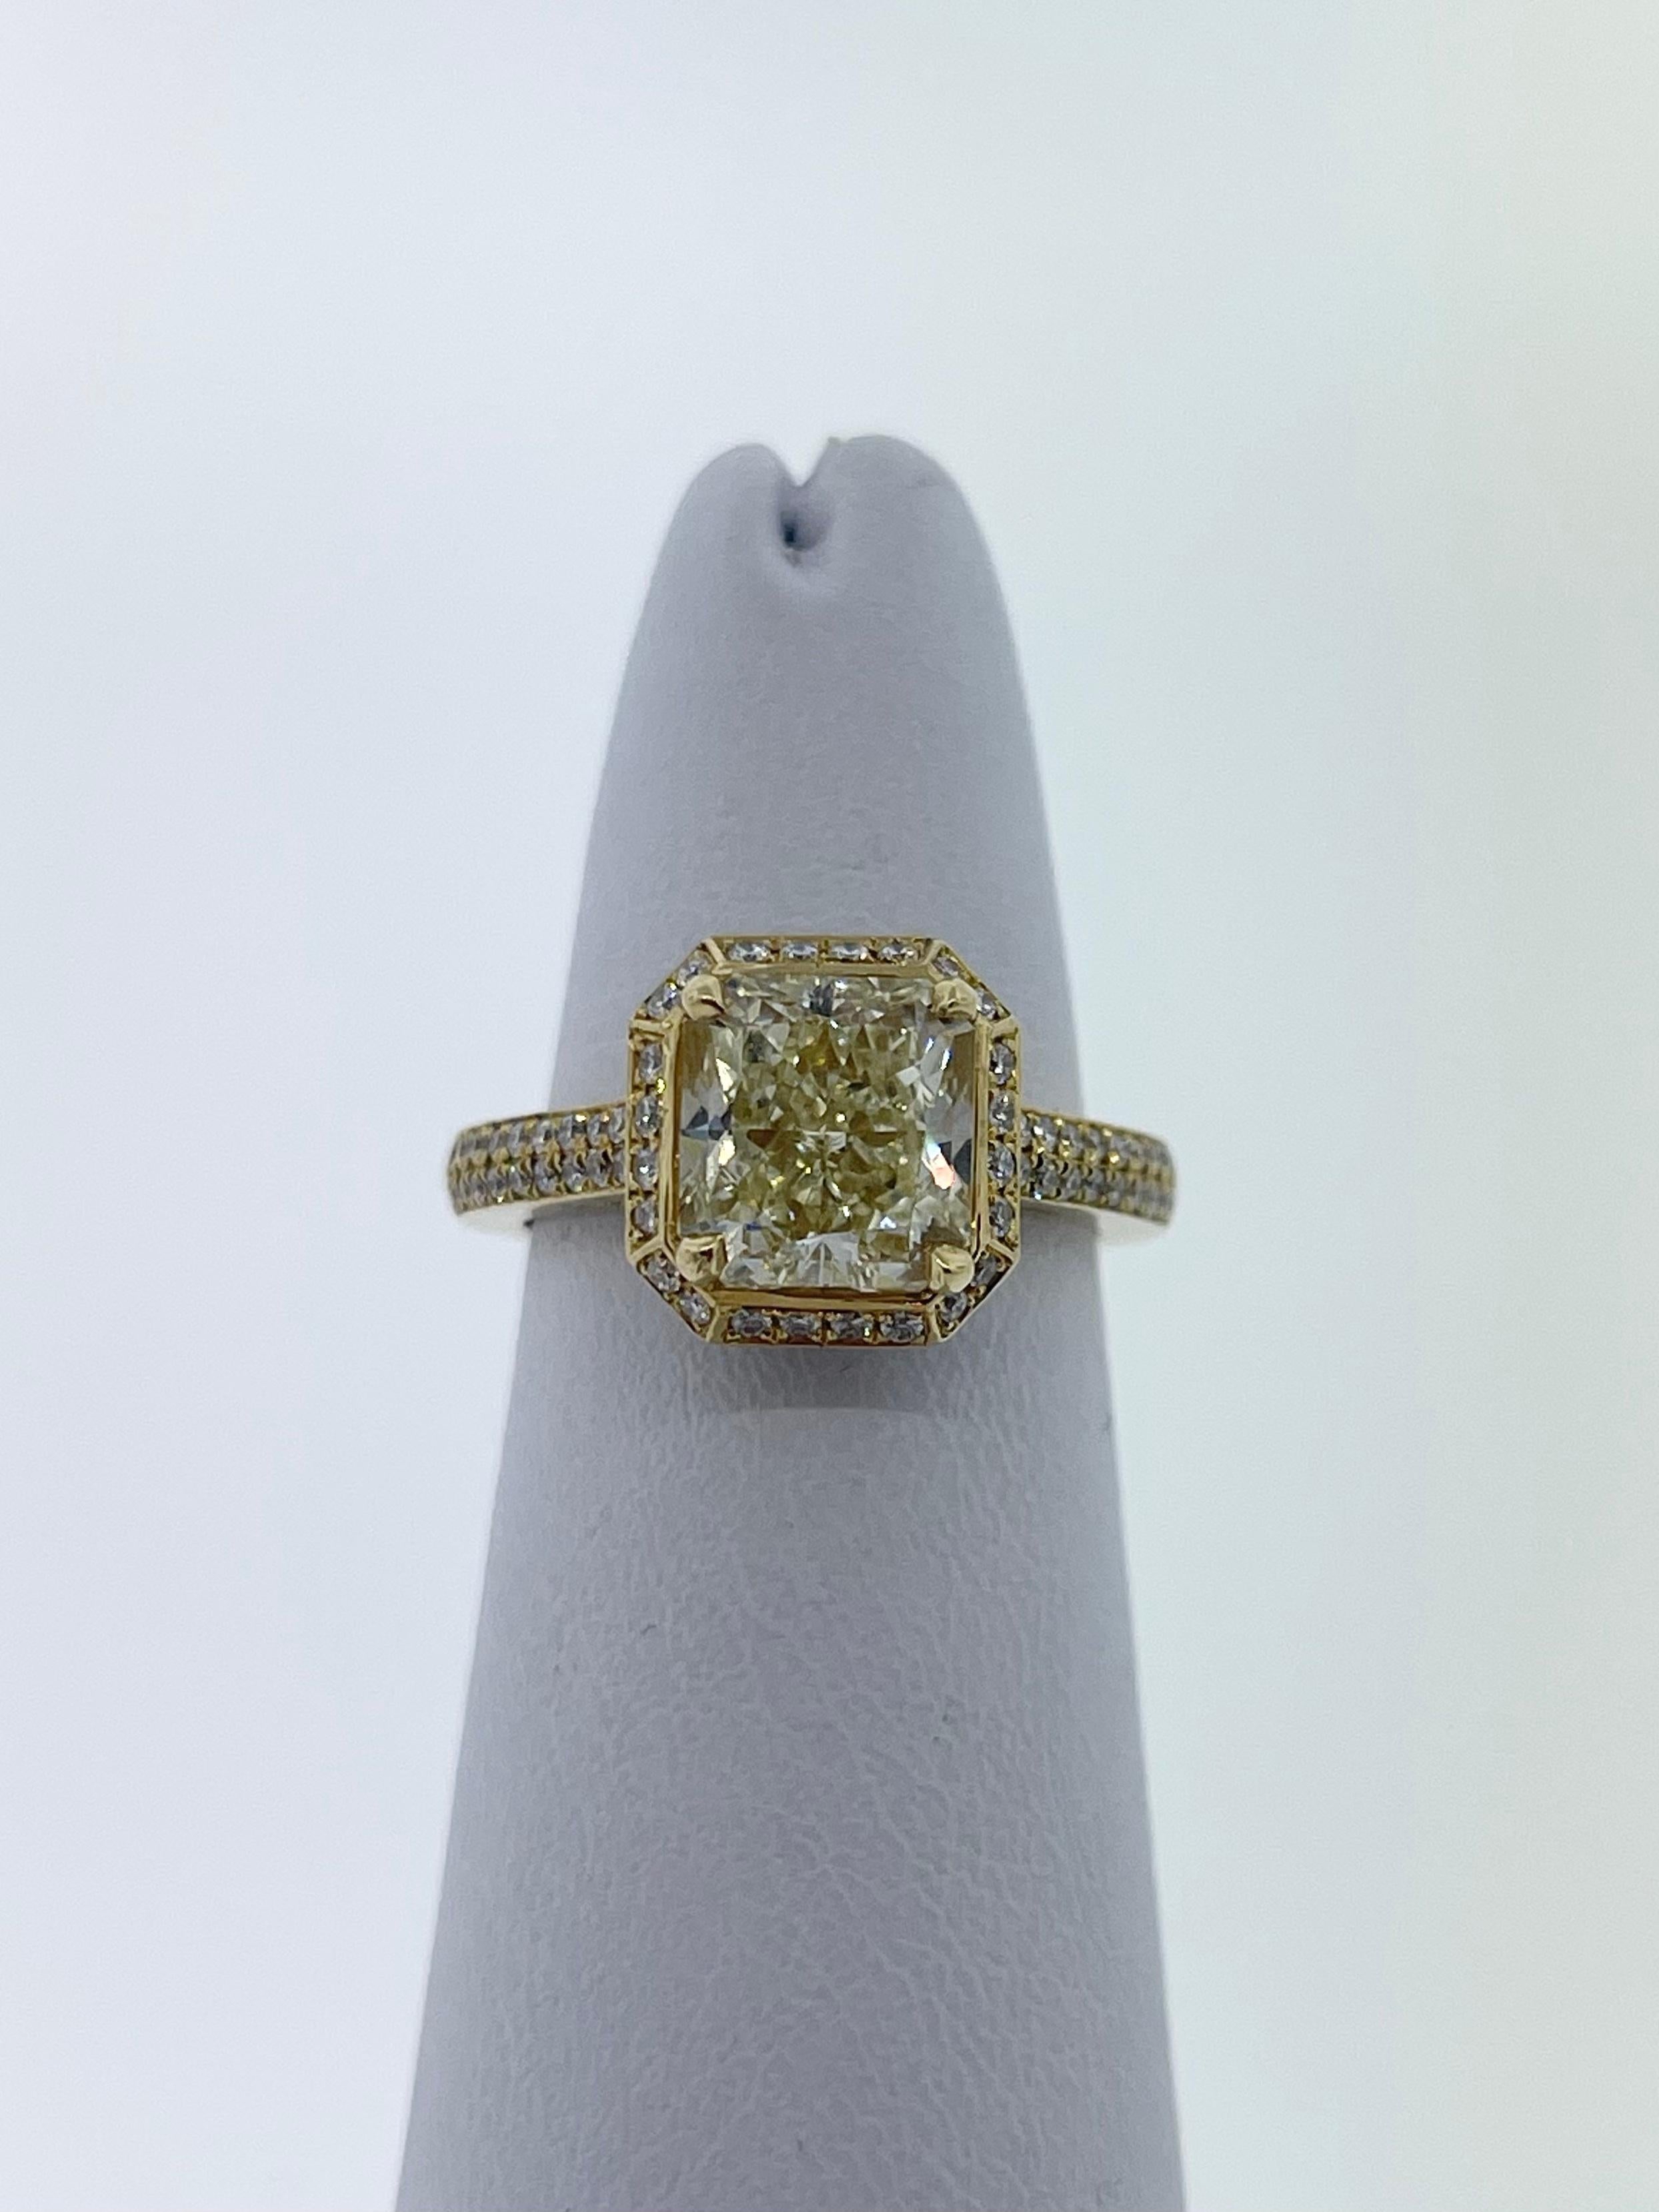 2.51ct Fancy Yellow Radiant Cut Diamond FY-VS1 in Quality Set in 18k Yellow Gold. 

The ring itself has 0.46 carat total weight of round diamonds going half way down the band and surrounding the center stone. 

The diamond is EGL Certified. 
